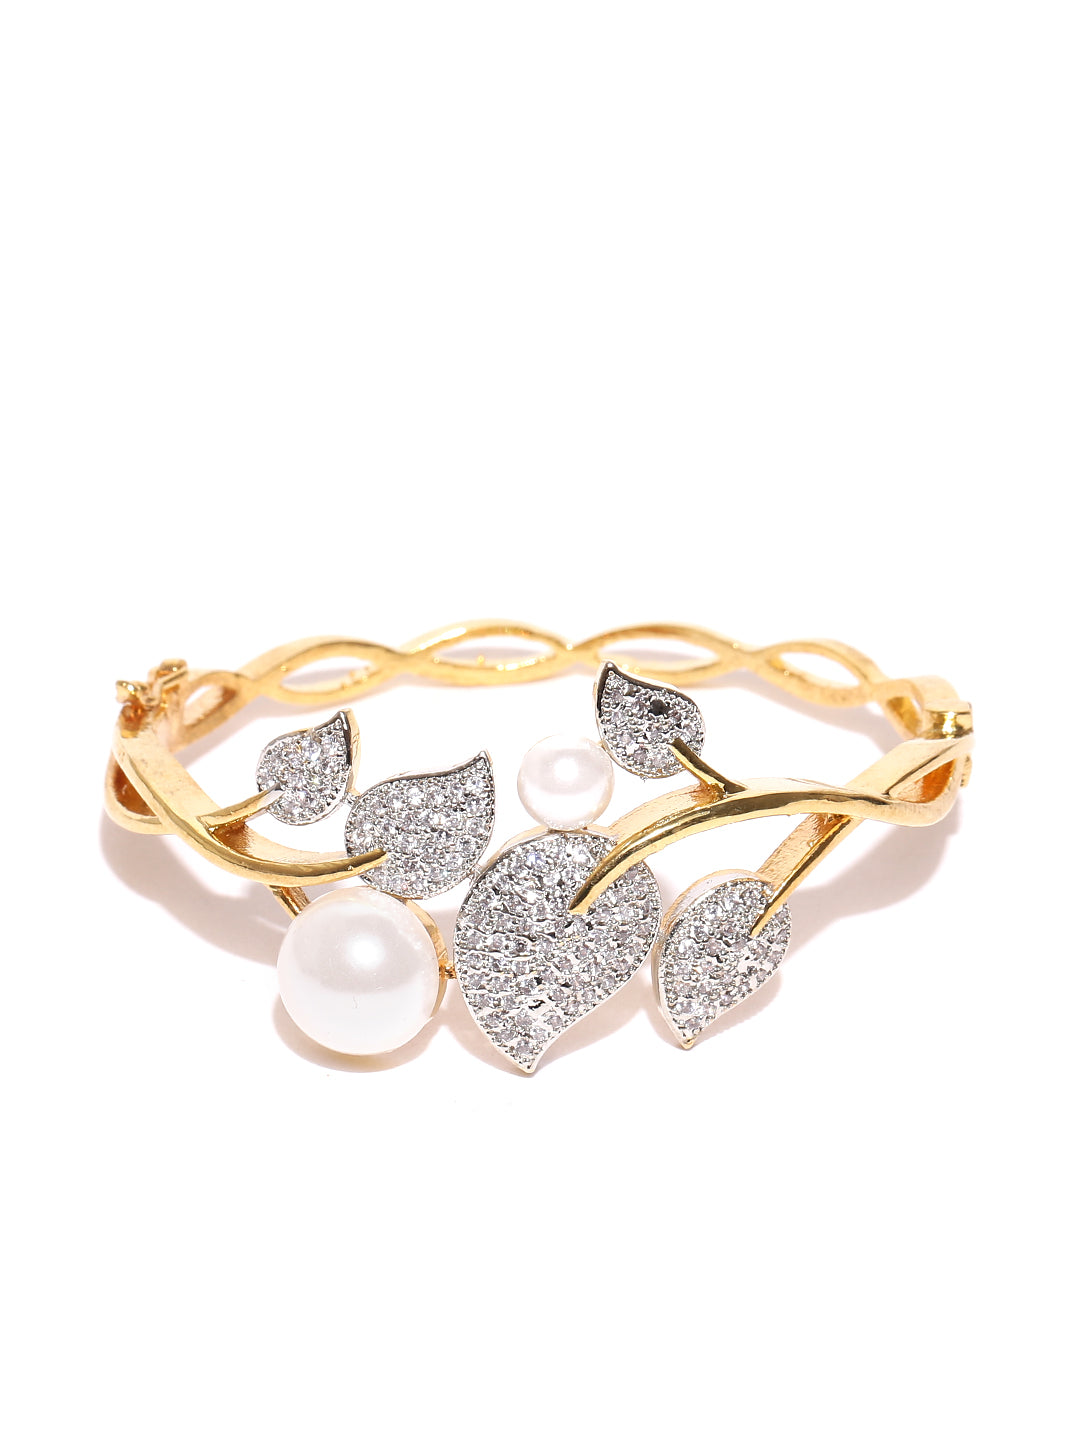 Gold-Plated American Diamond and Pearls Studded Bracelet in Floral Pattern